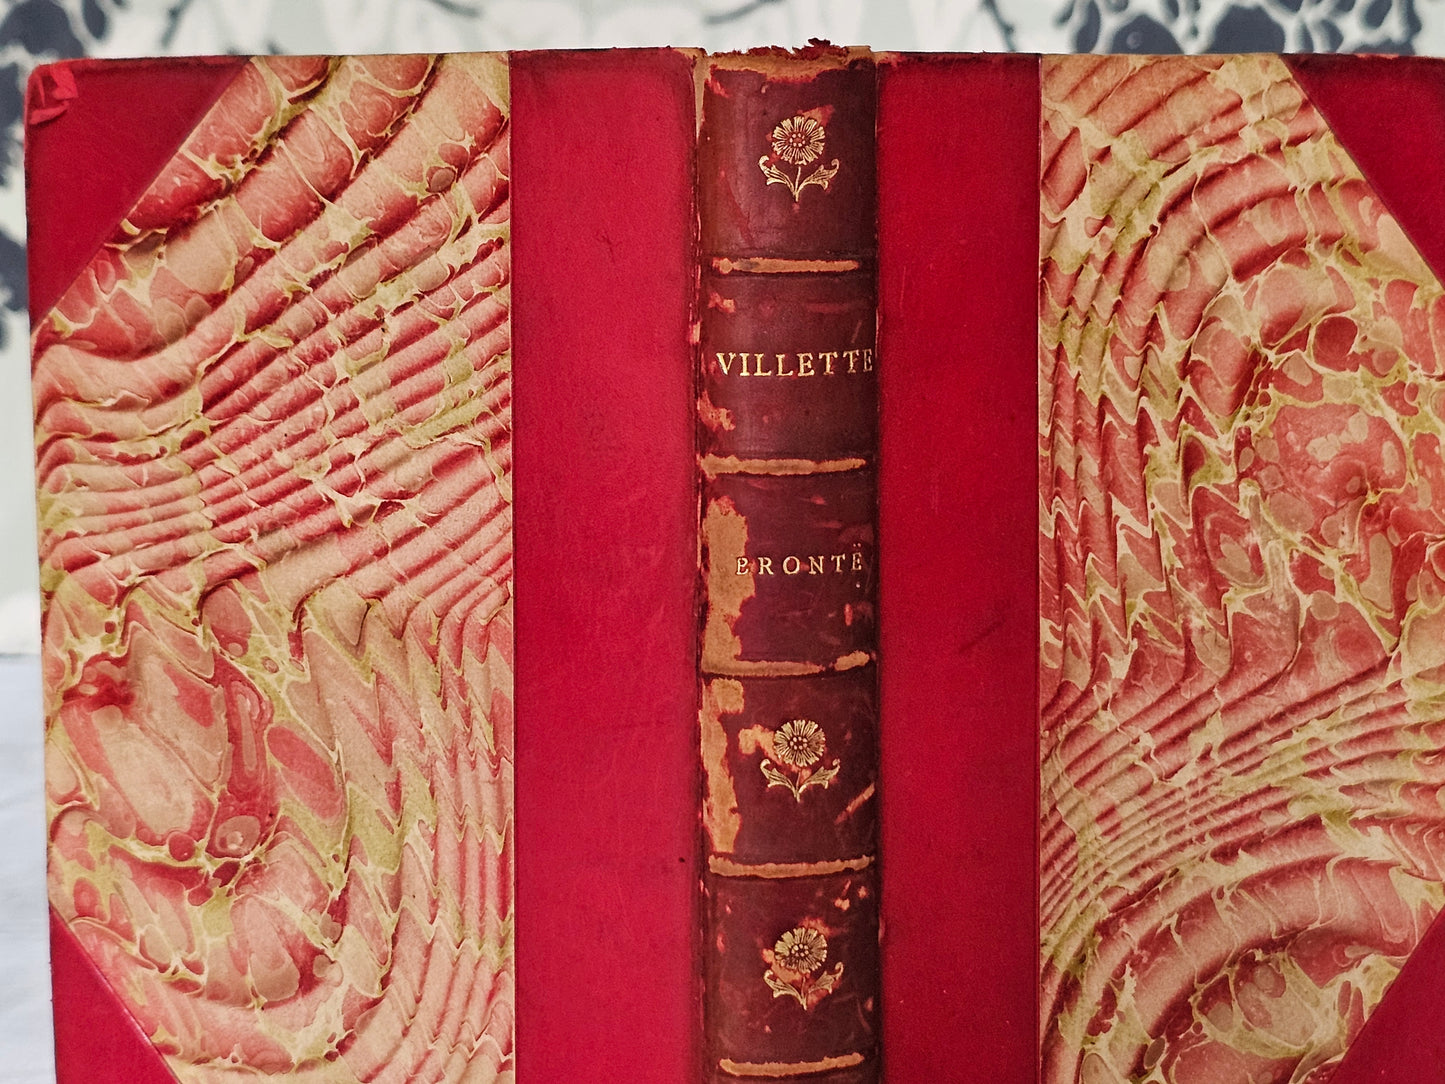 1889 Villette by Charlotte Bronte / Smith Elder & Co London / Red Leather Three Quarter Binding / Antique Bronte Book / Some Wear to Leather